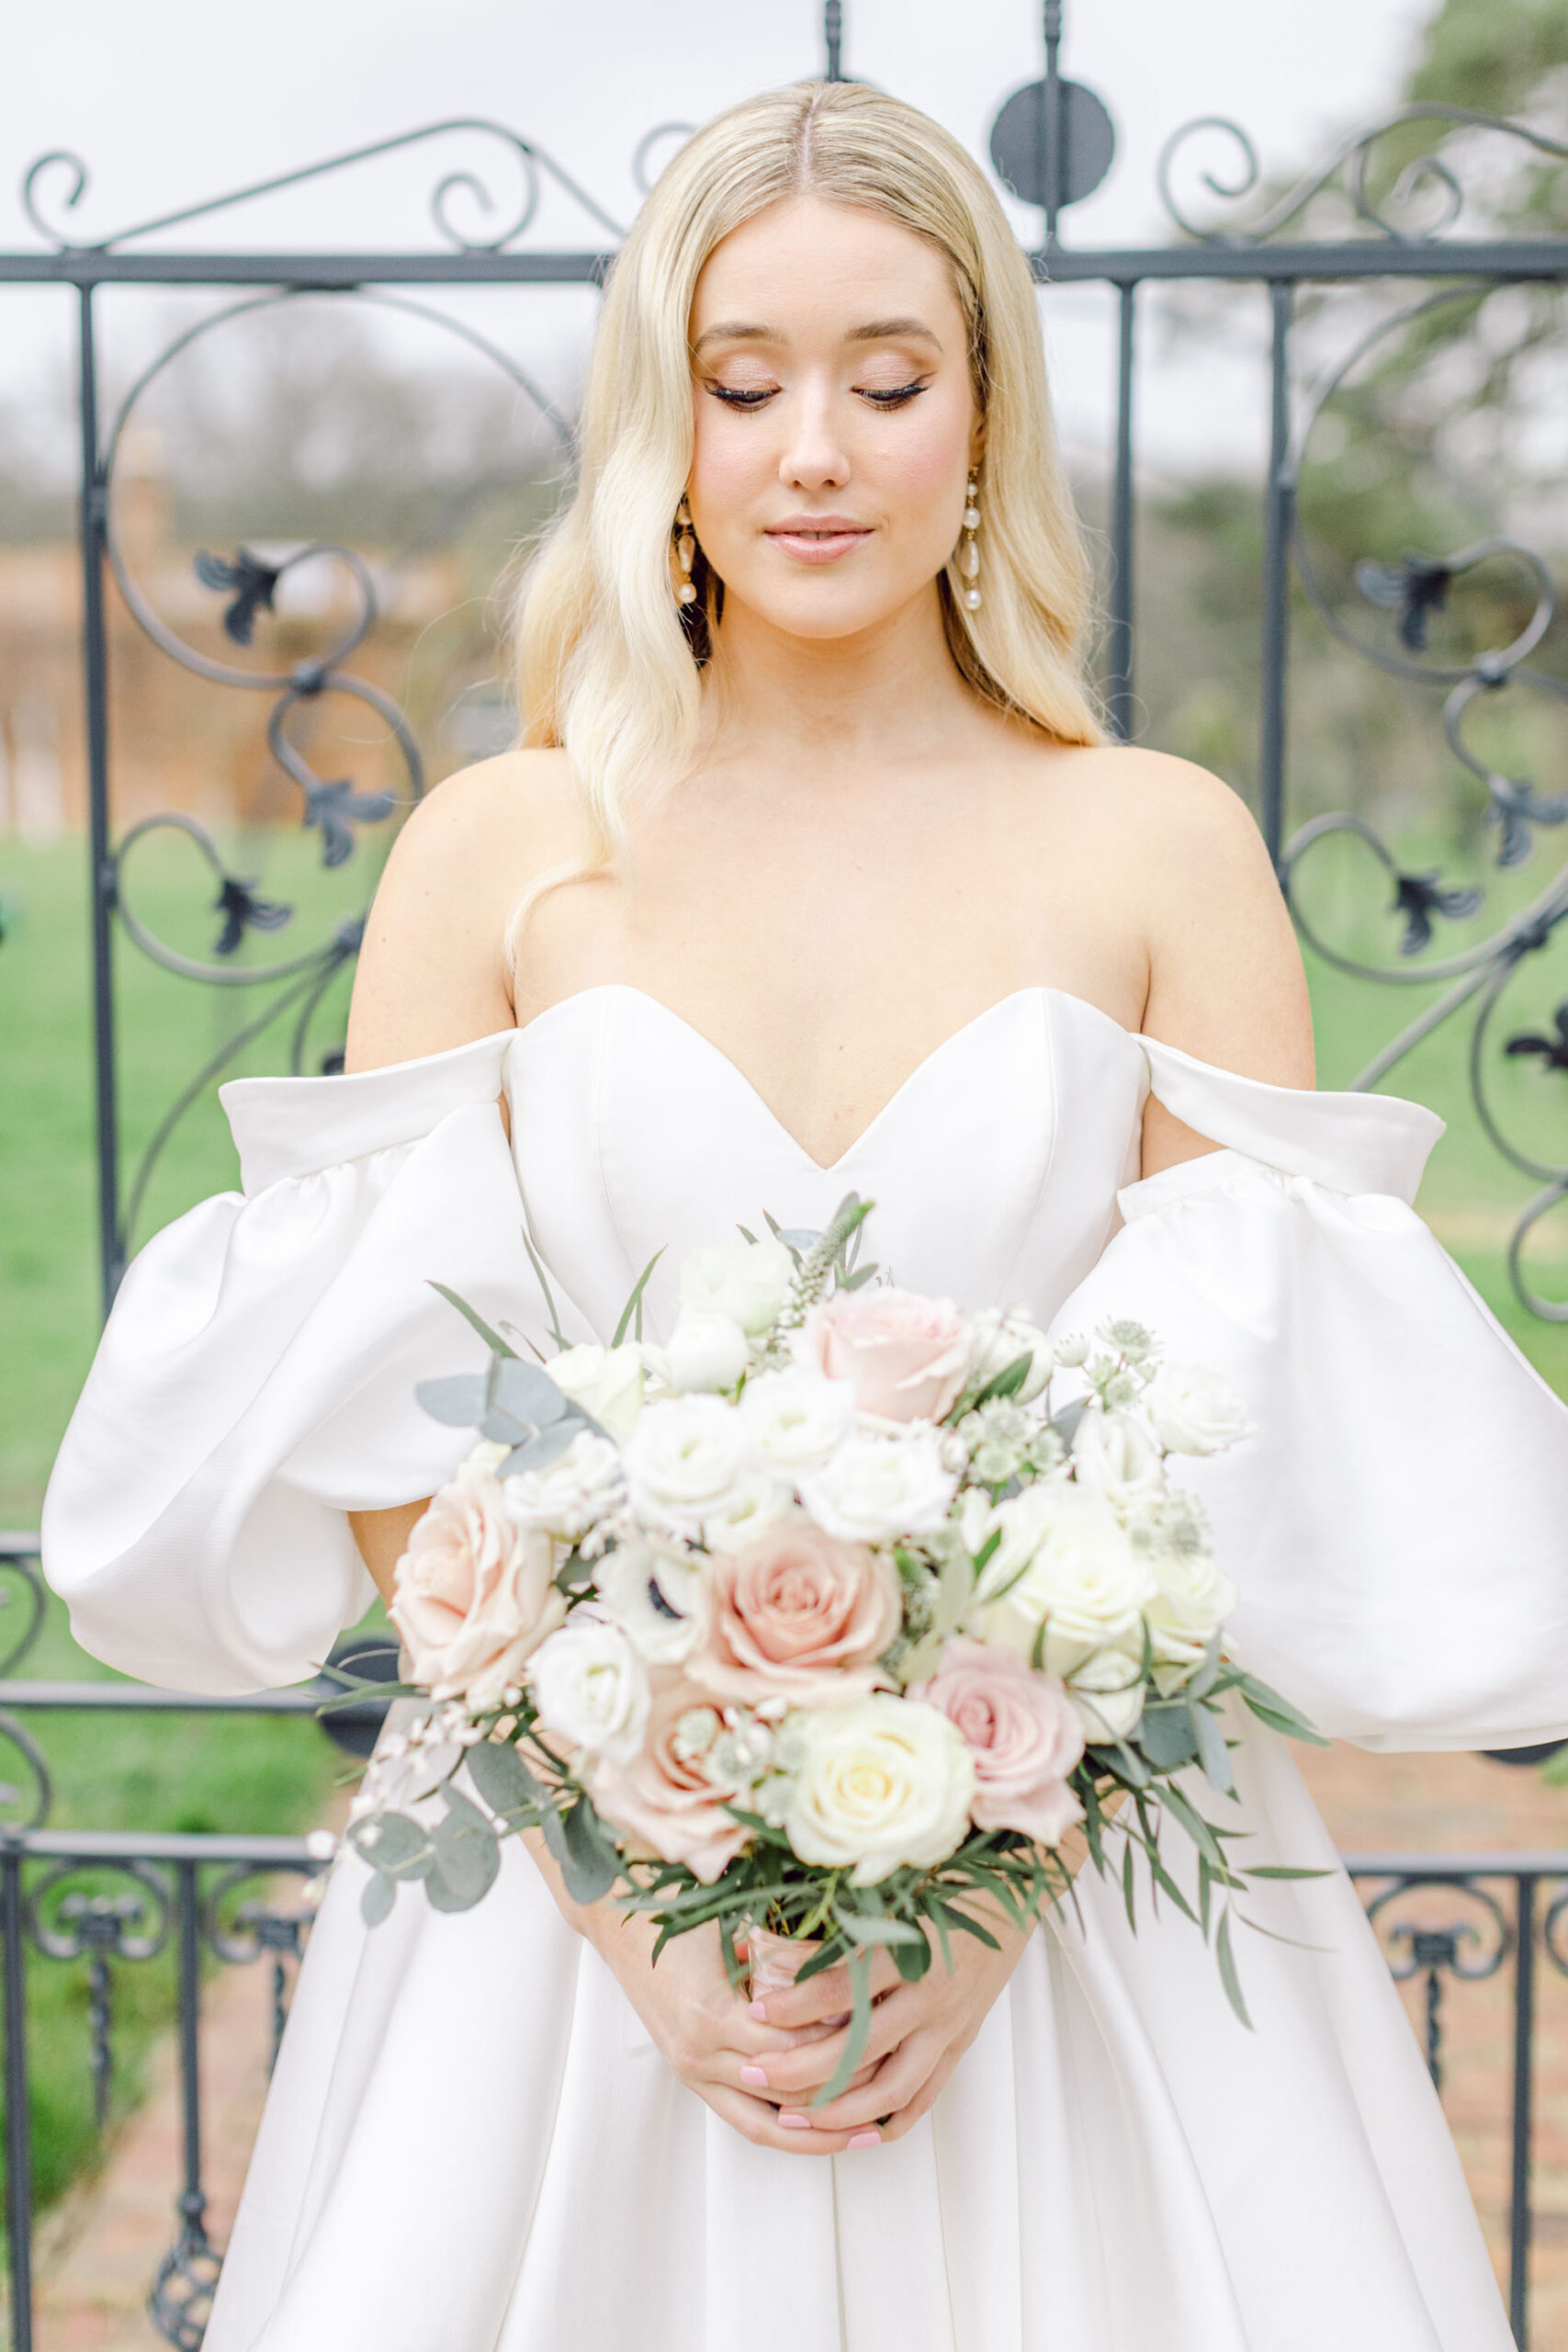 A model bride poses with a bouquet of white and blush roses. She wears a luxury wedding dress by Lyn Ashworth in an off the shoulder design. Credit Natalie D Photography